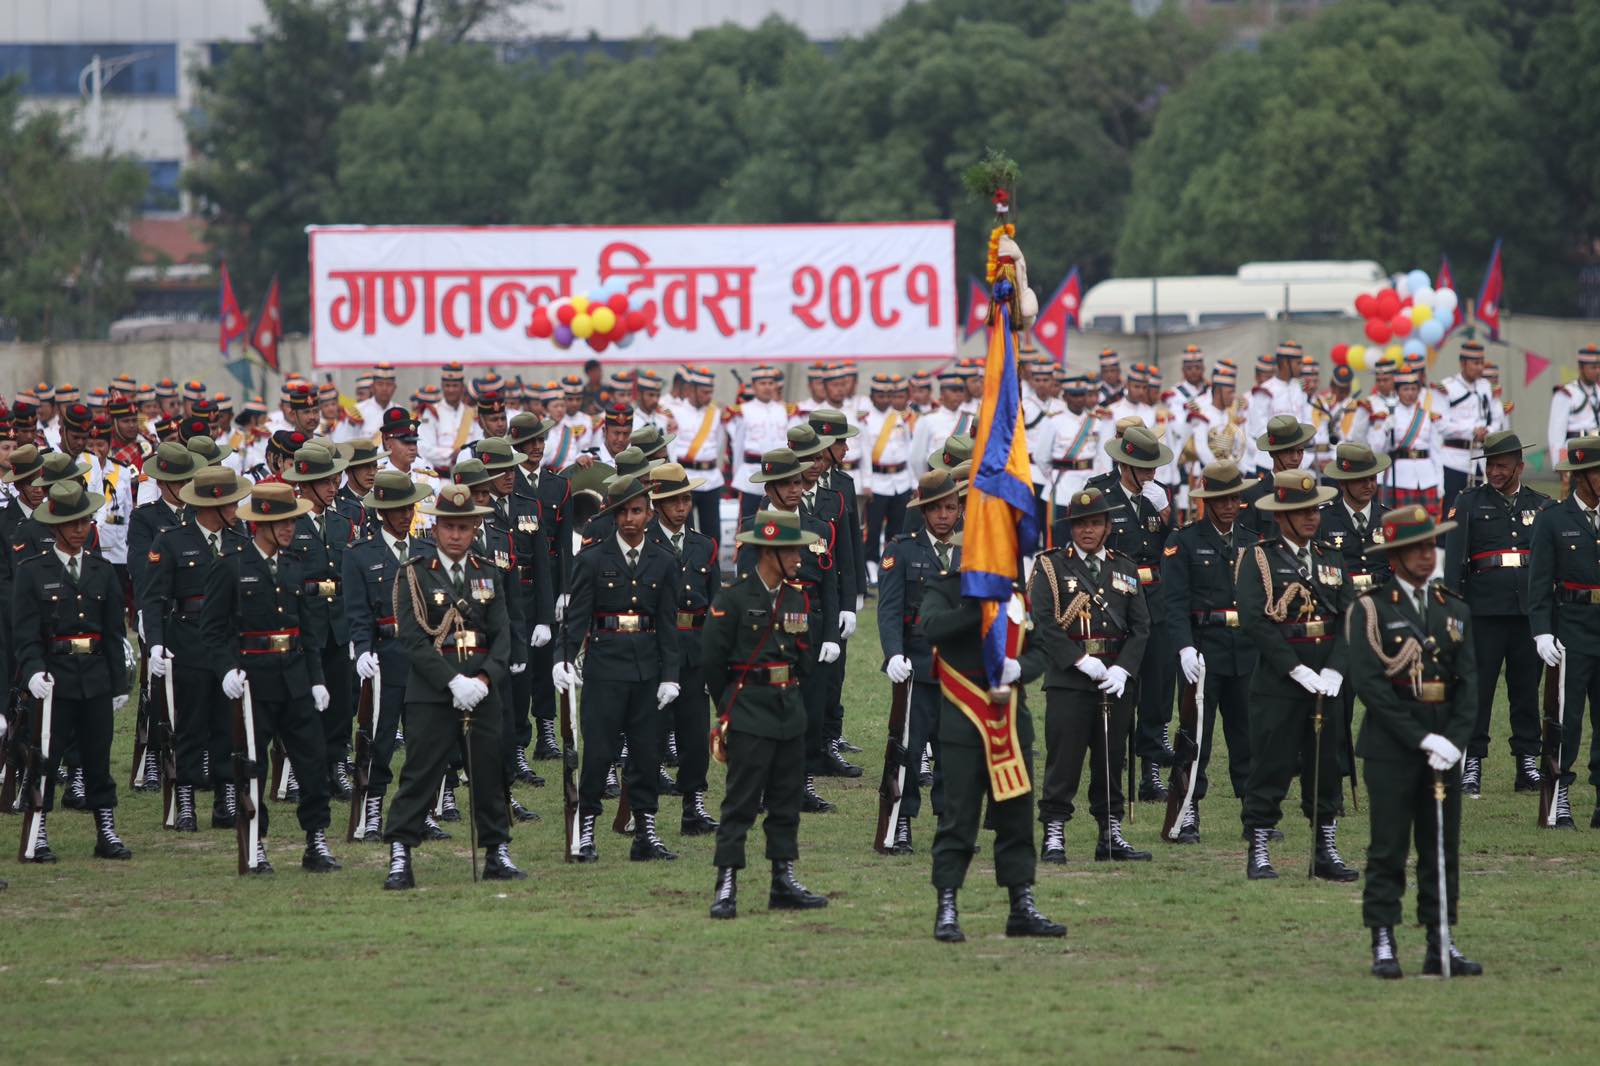 In Pictures: Republic Day celebrations at Army Pavilion